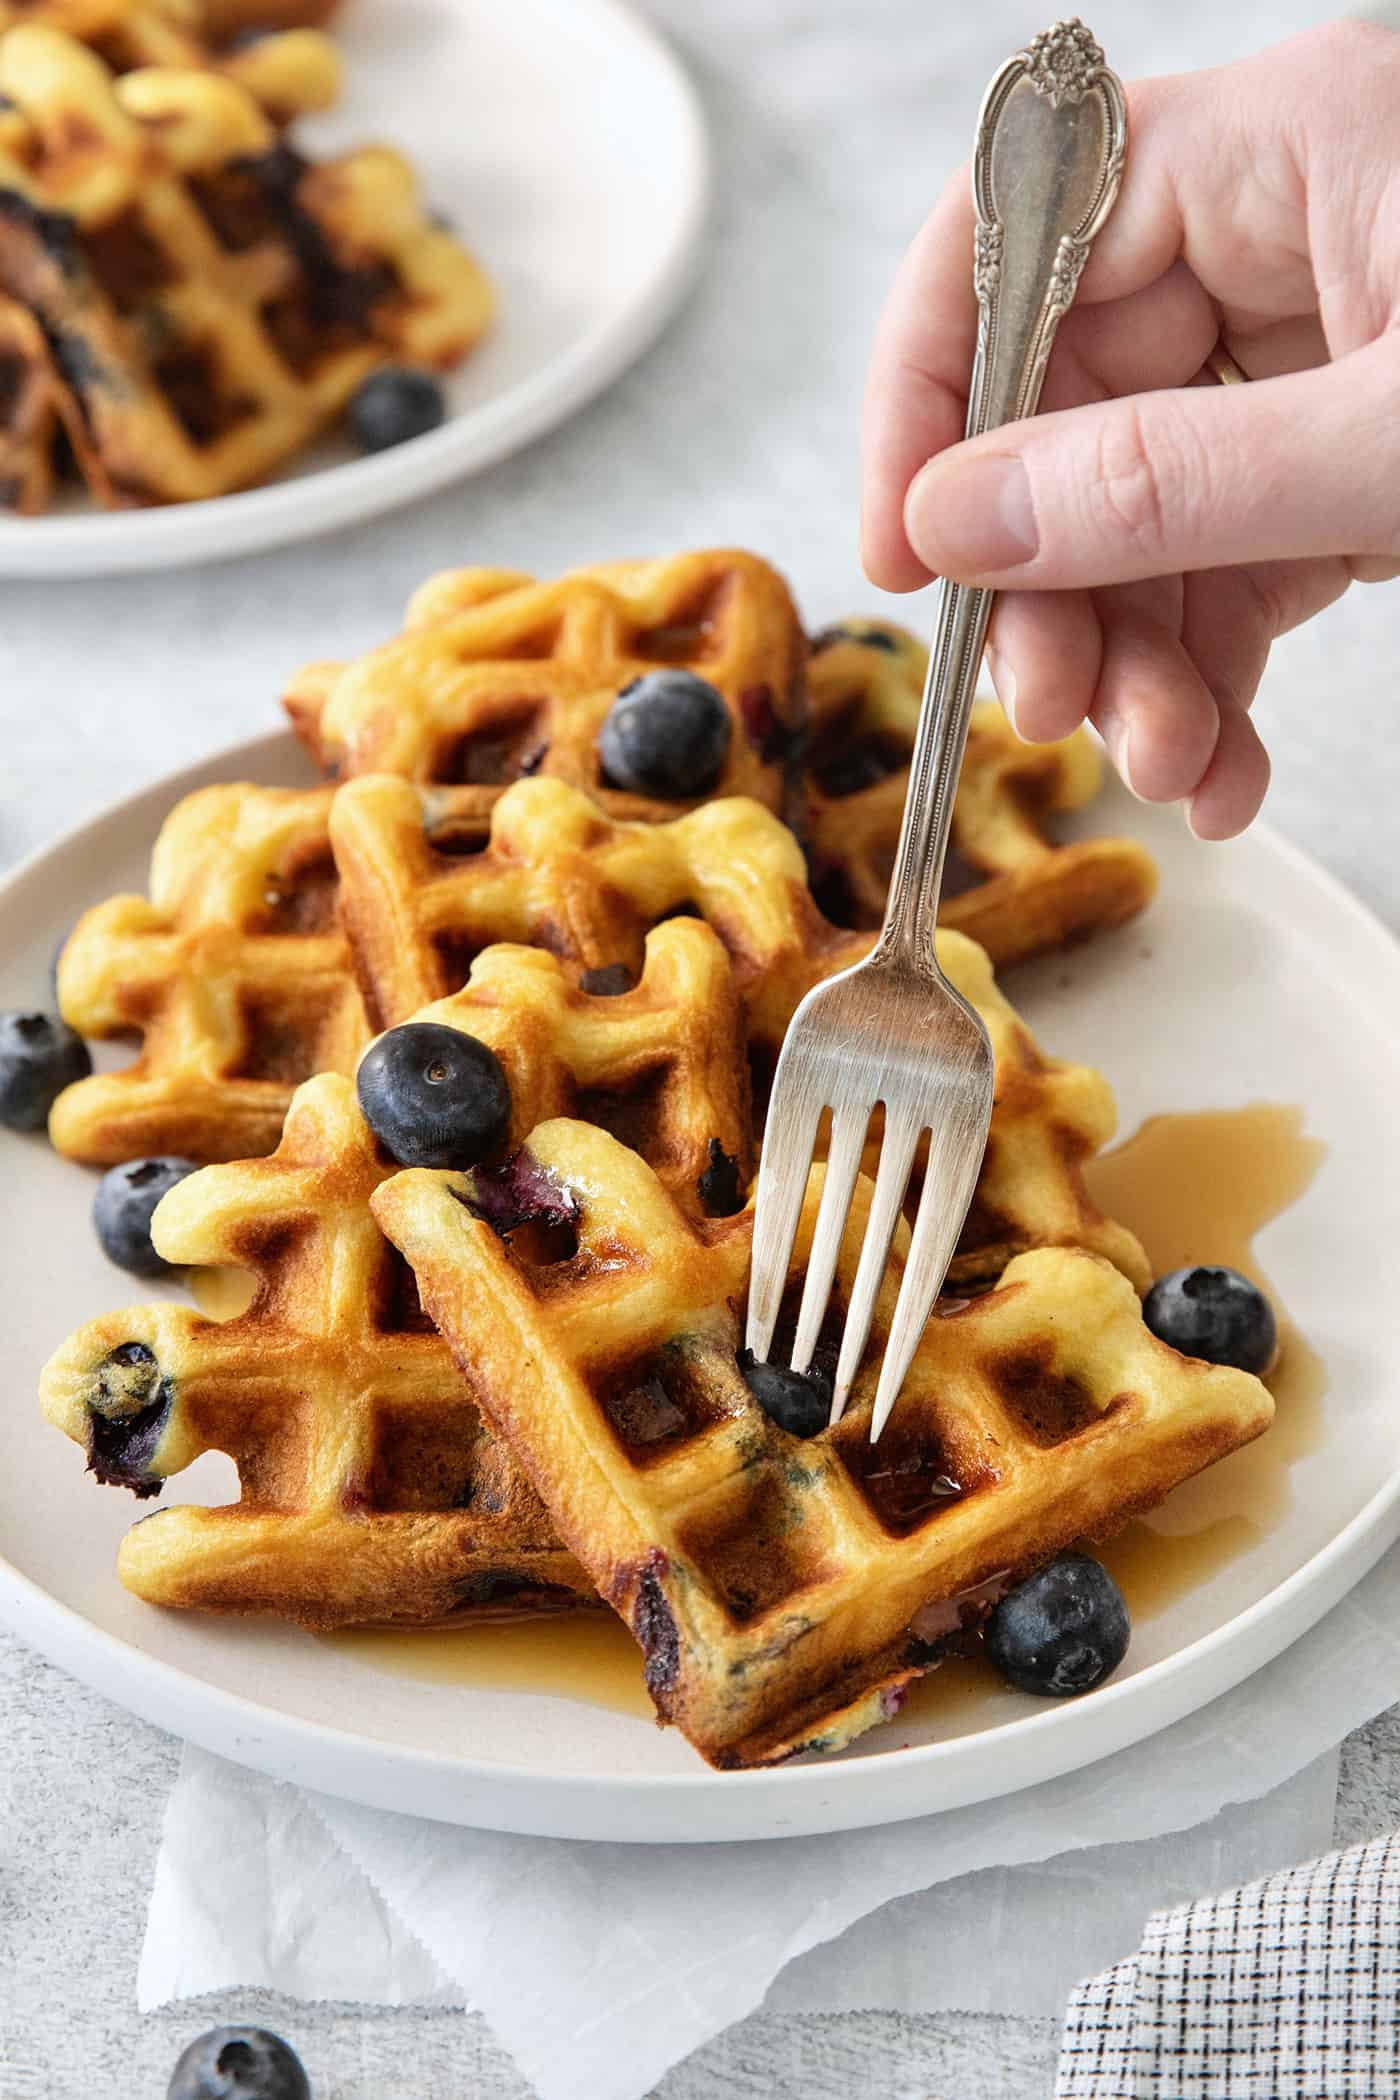 A hand holds a fork to cup into a plate of blueberry waffles.